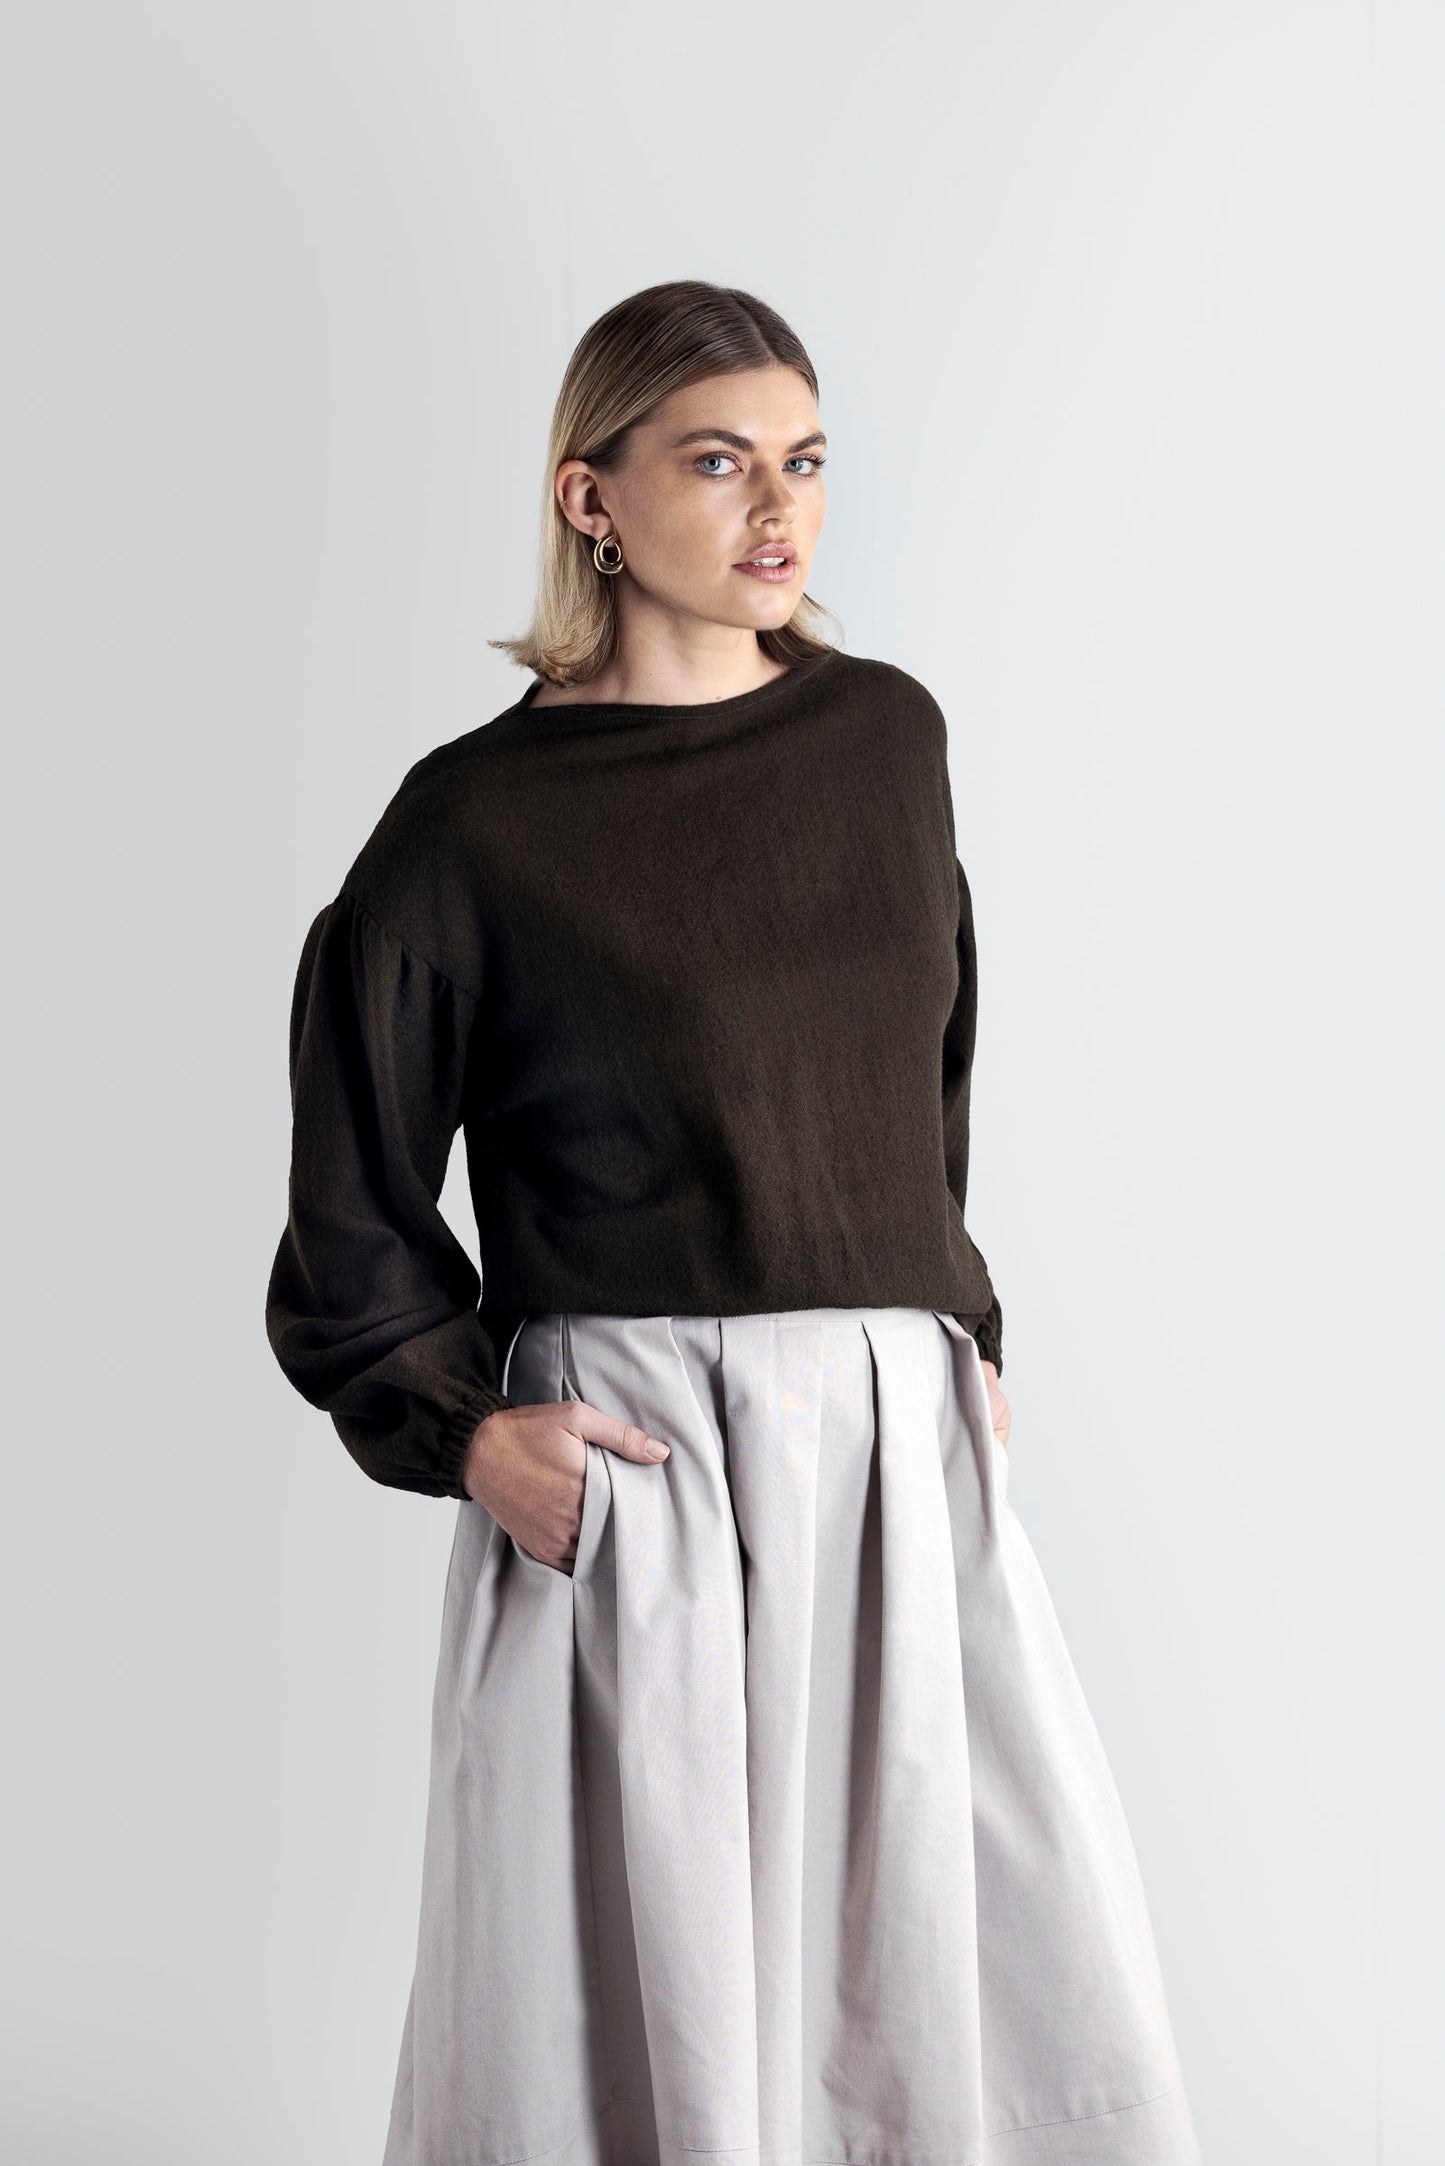 Mossy Wool Jumper - VOUS Contemporary Clothing